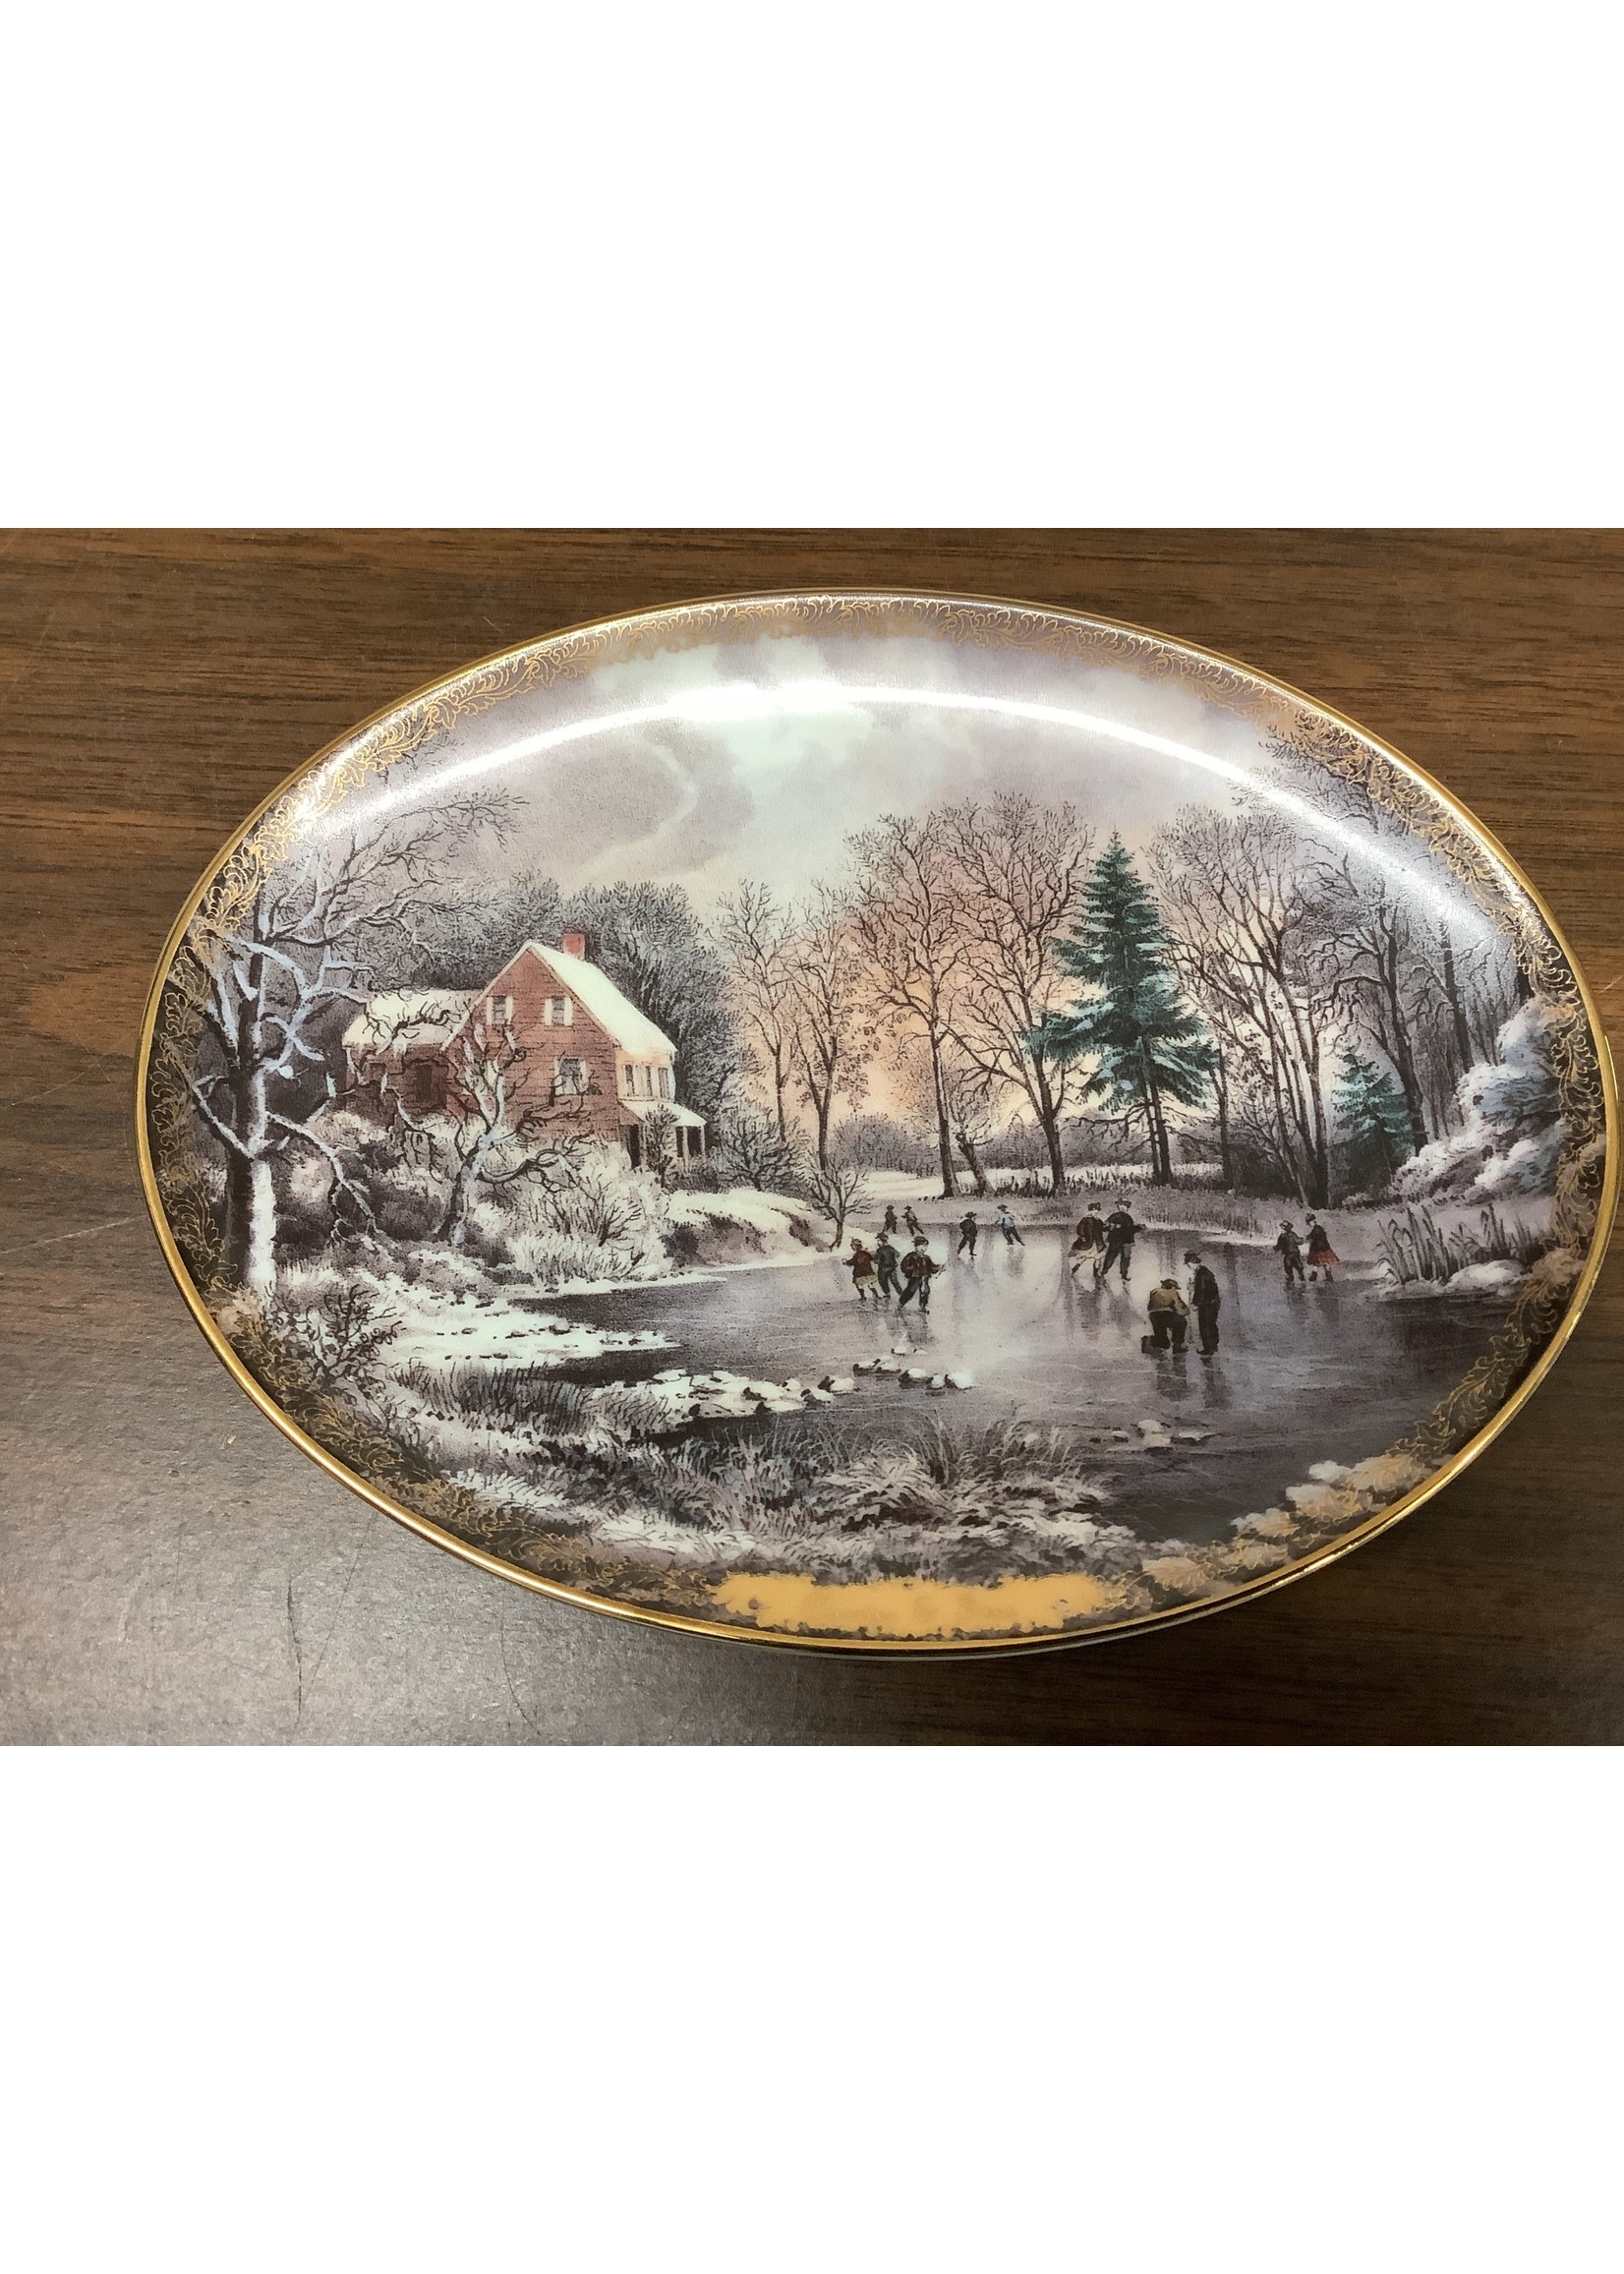 The Bradford Exchange Collectors Plate (1995) “Early Winter” Bradex- No. 84-B10-443.1